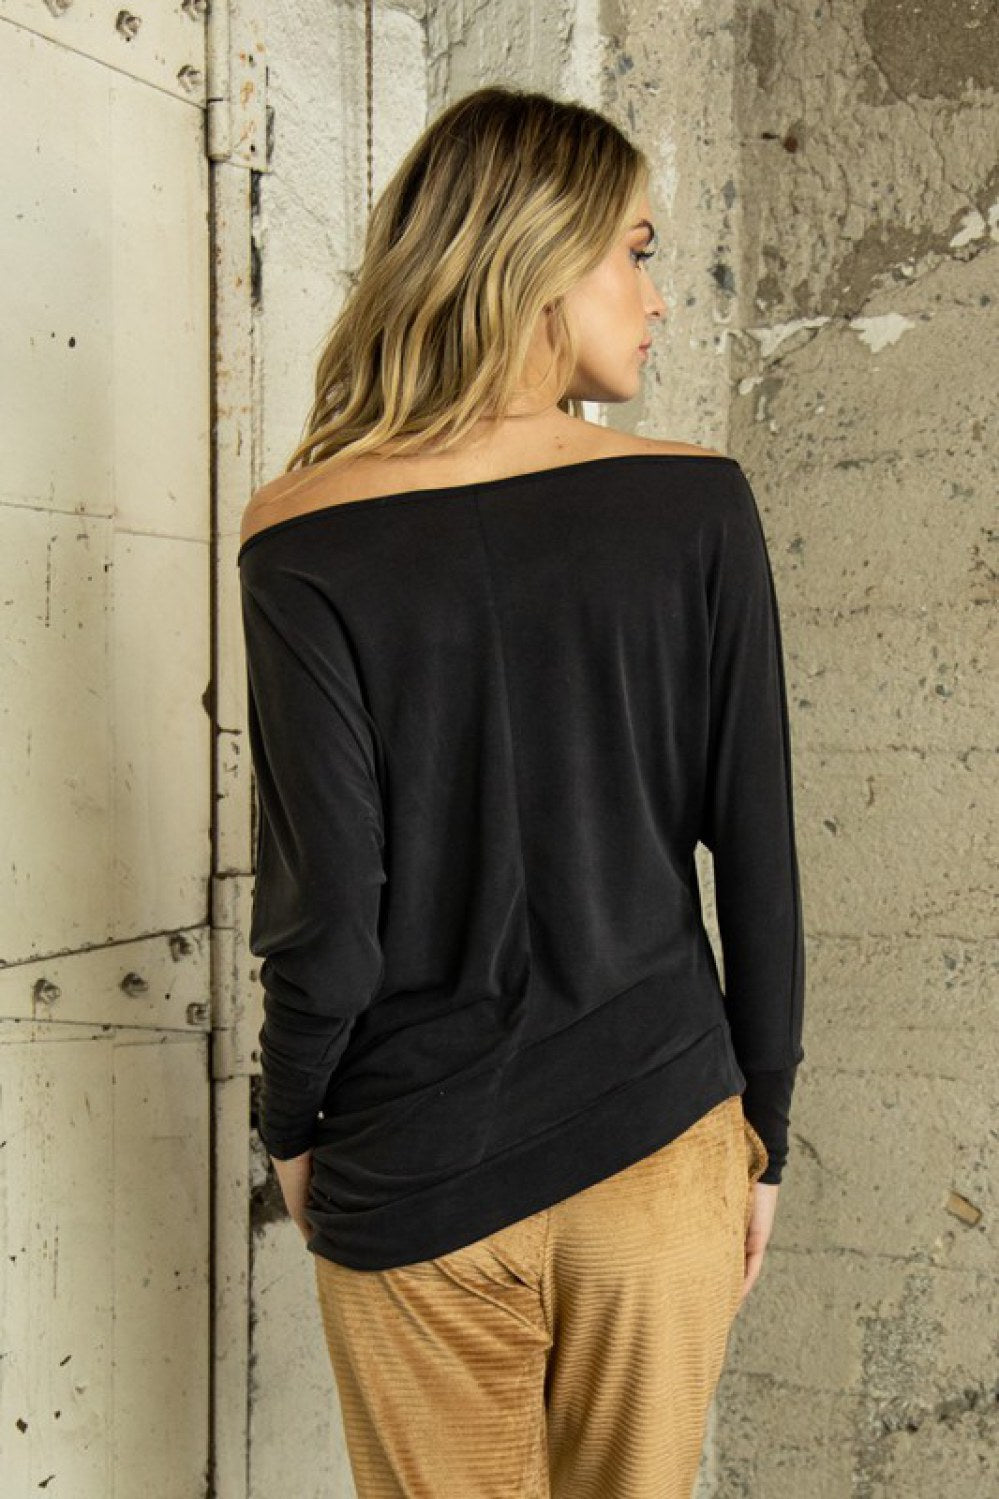 Cupro Asymmetric Top with Shirring Detail in Black | Made in USA | Off the Shoulder | Classy Cozy Cool Women's American Clothing Boutique